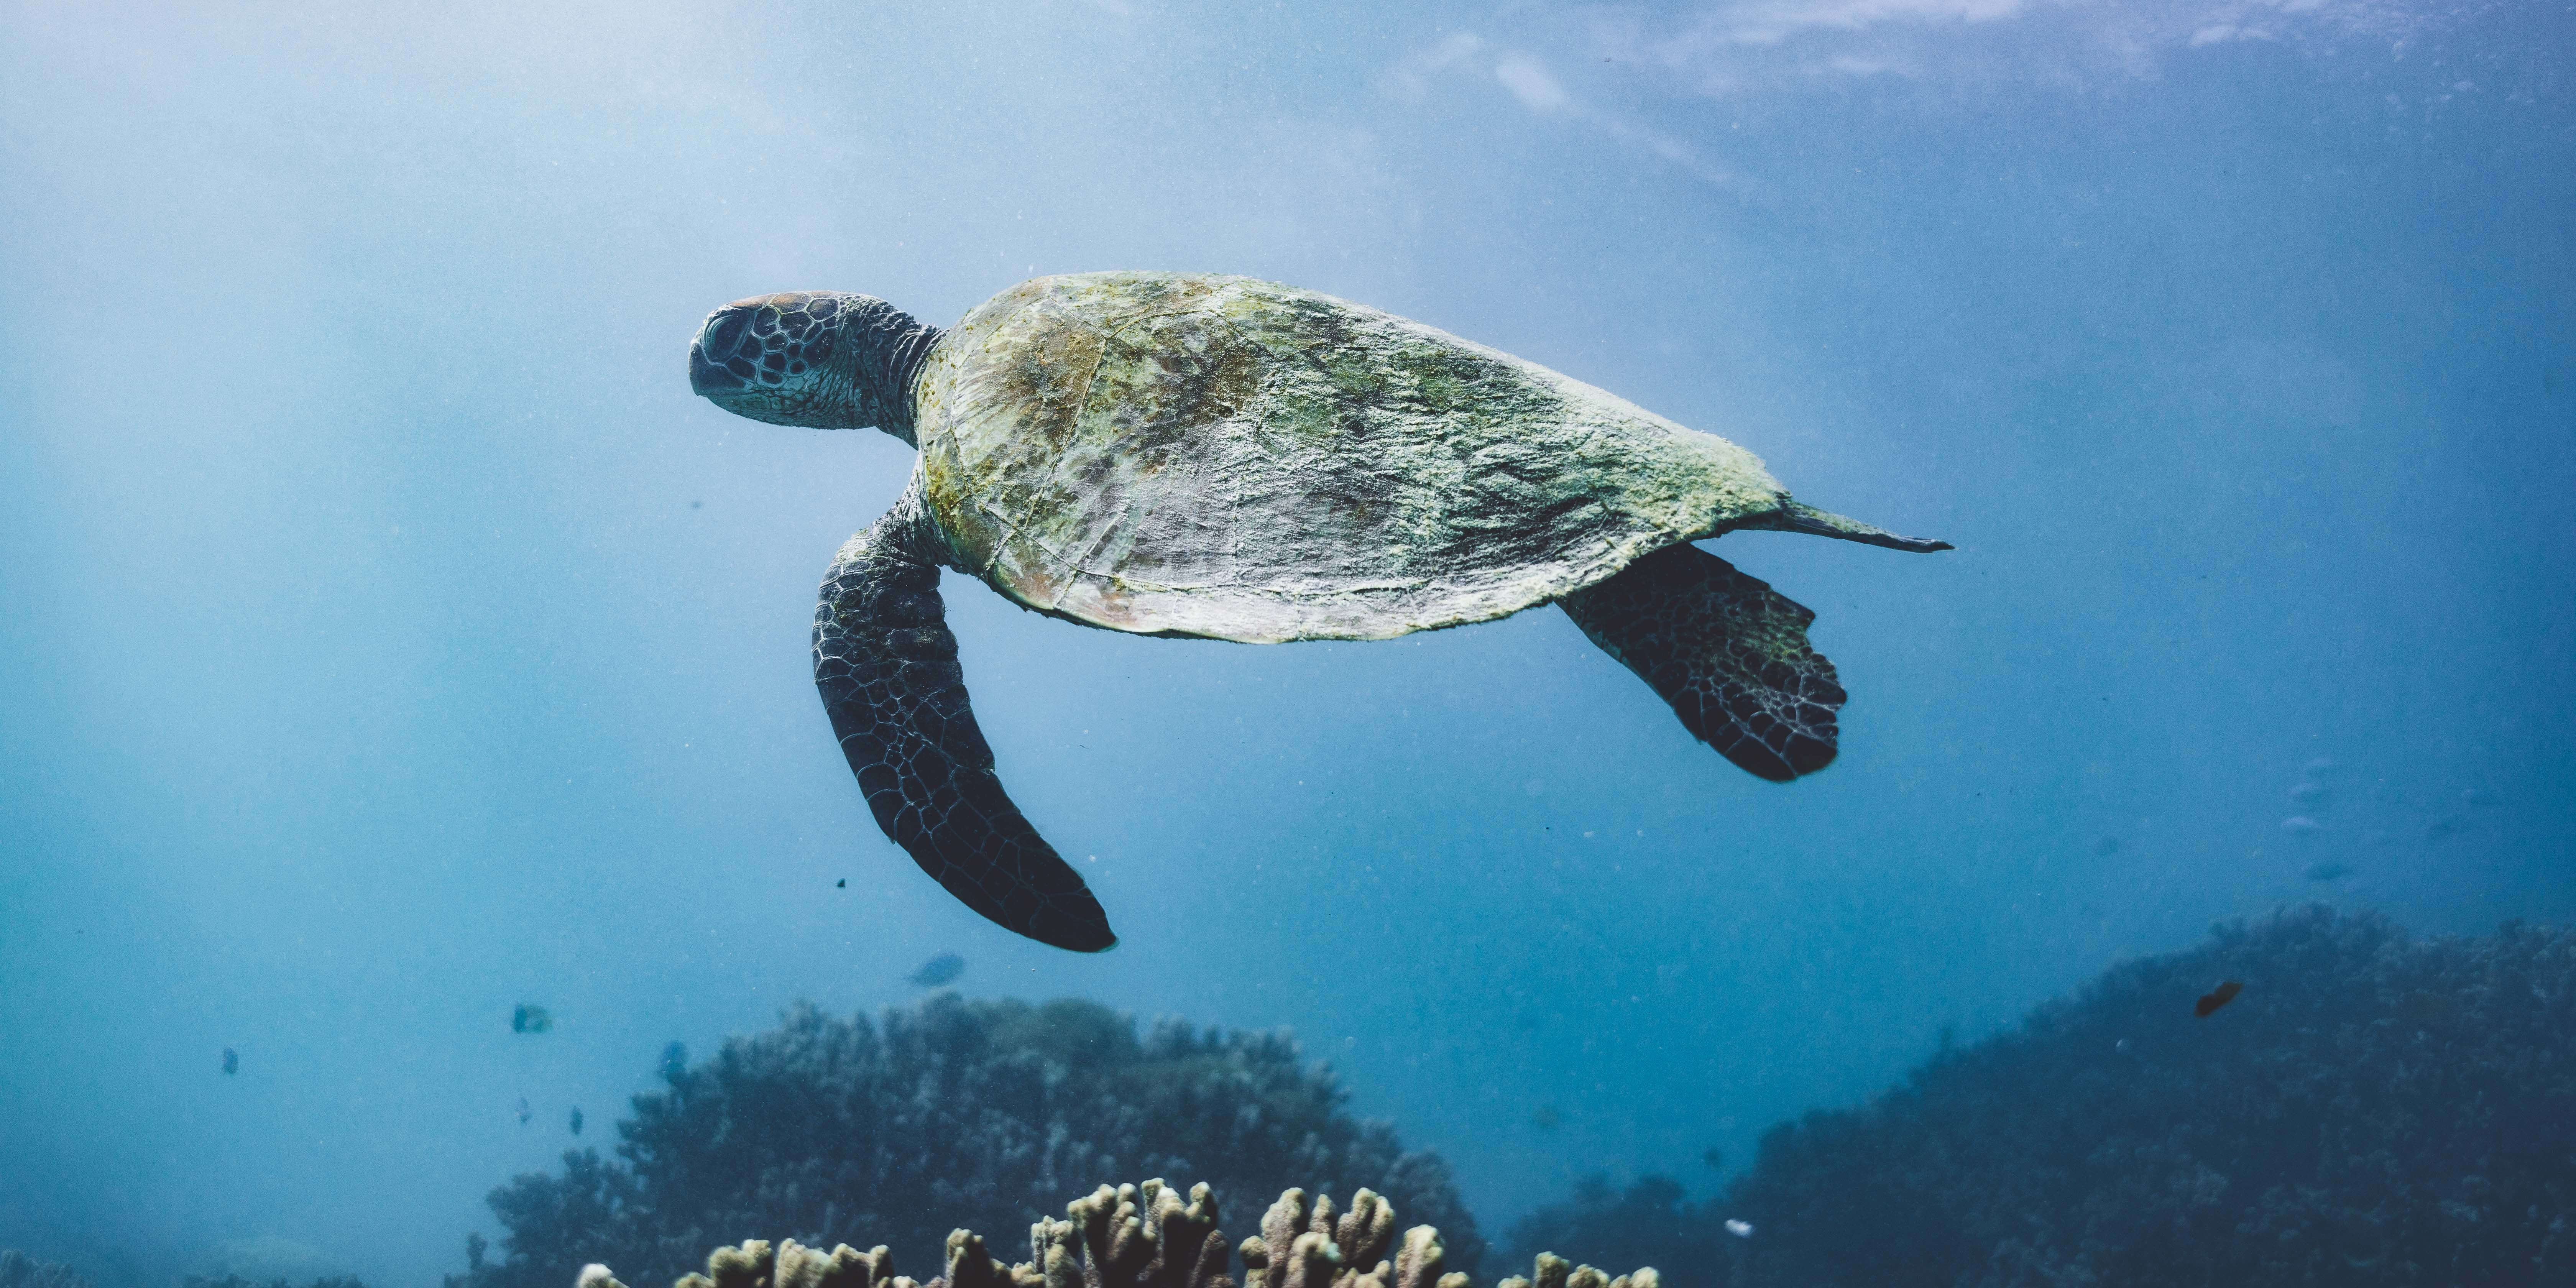 Underwater view of a green turtle swimming above corals.